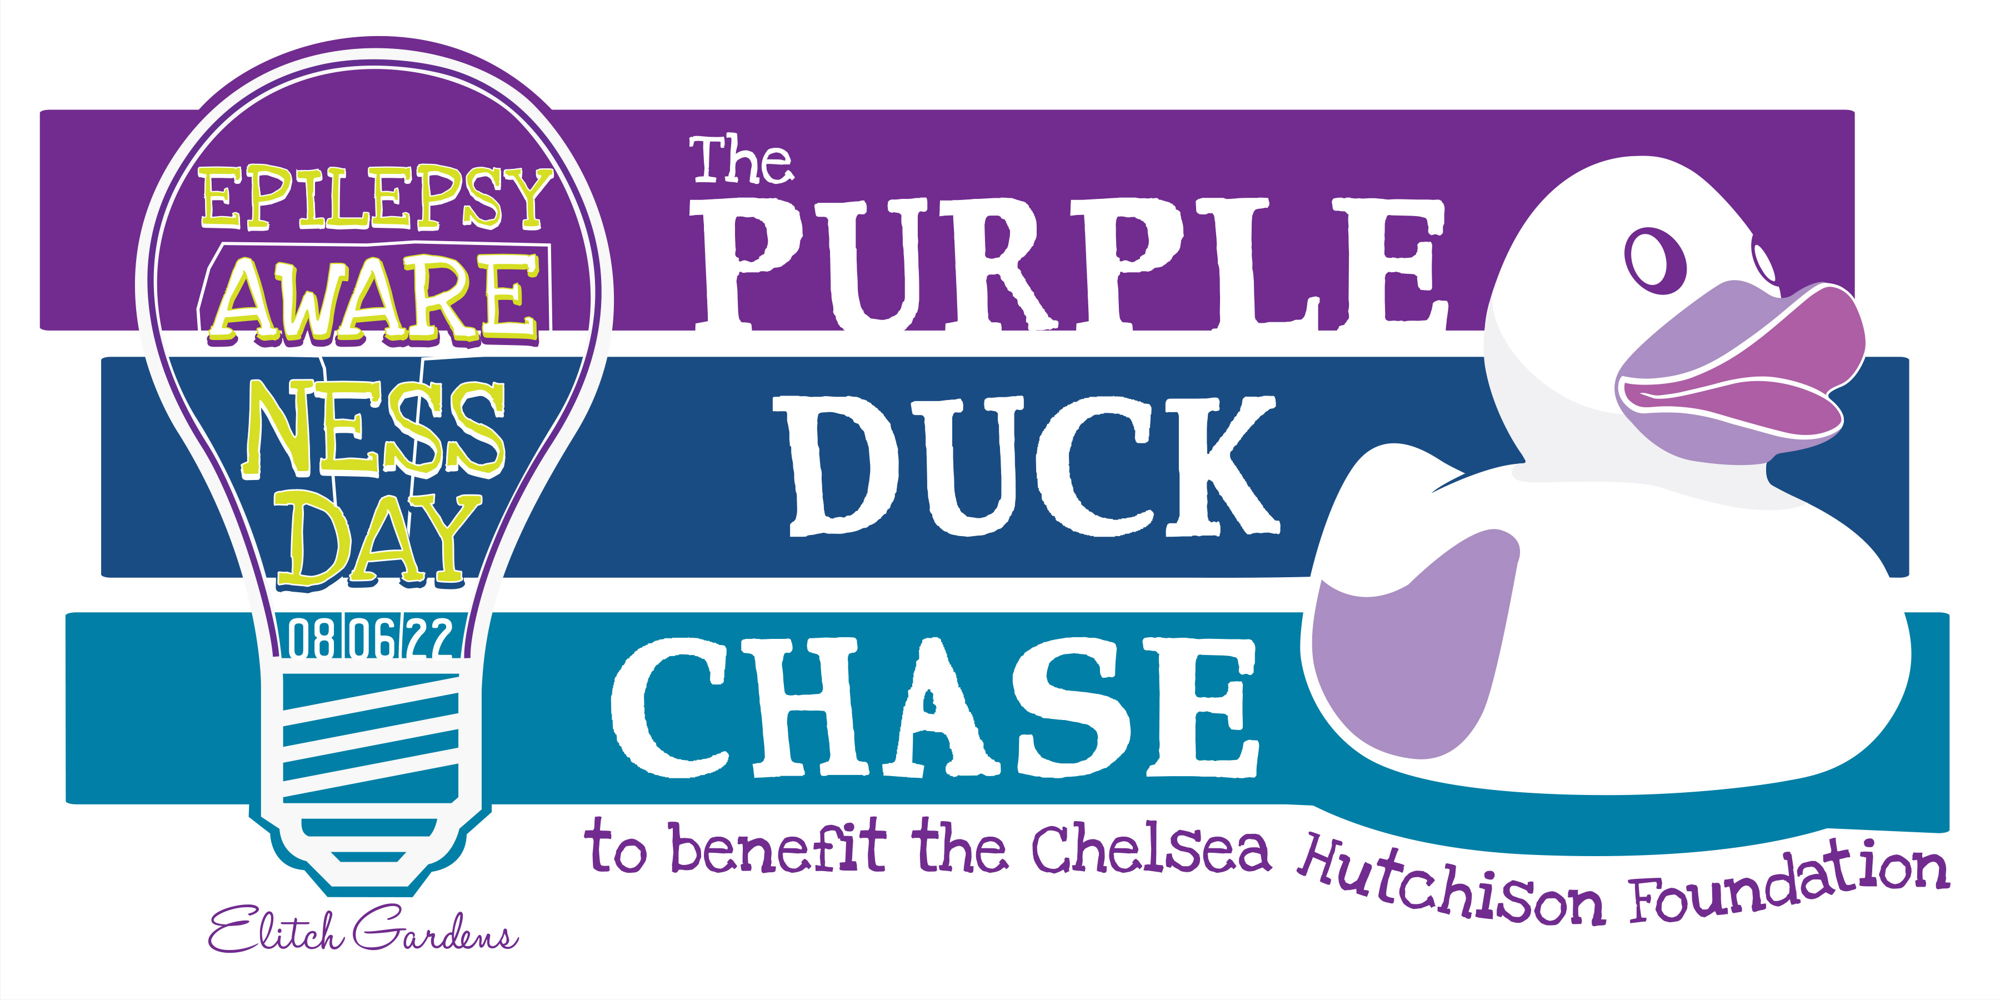 Epilepsy Awareness Day at Elitches and the Purple Duck Chase promotional image